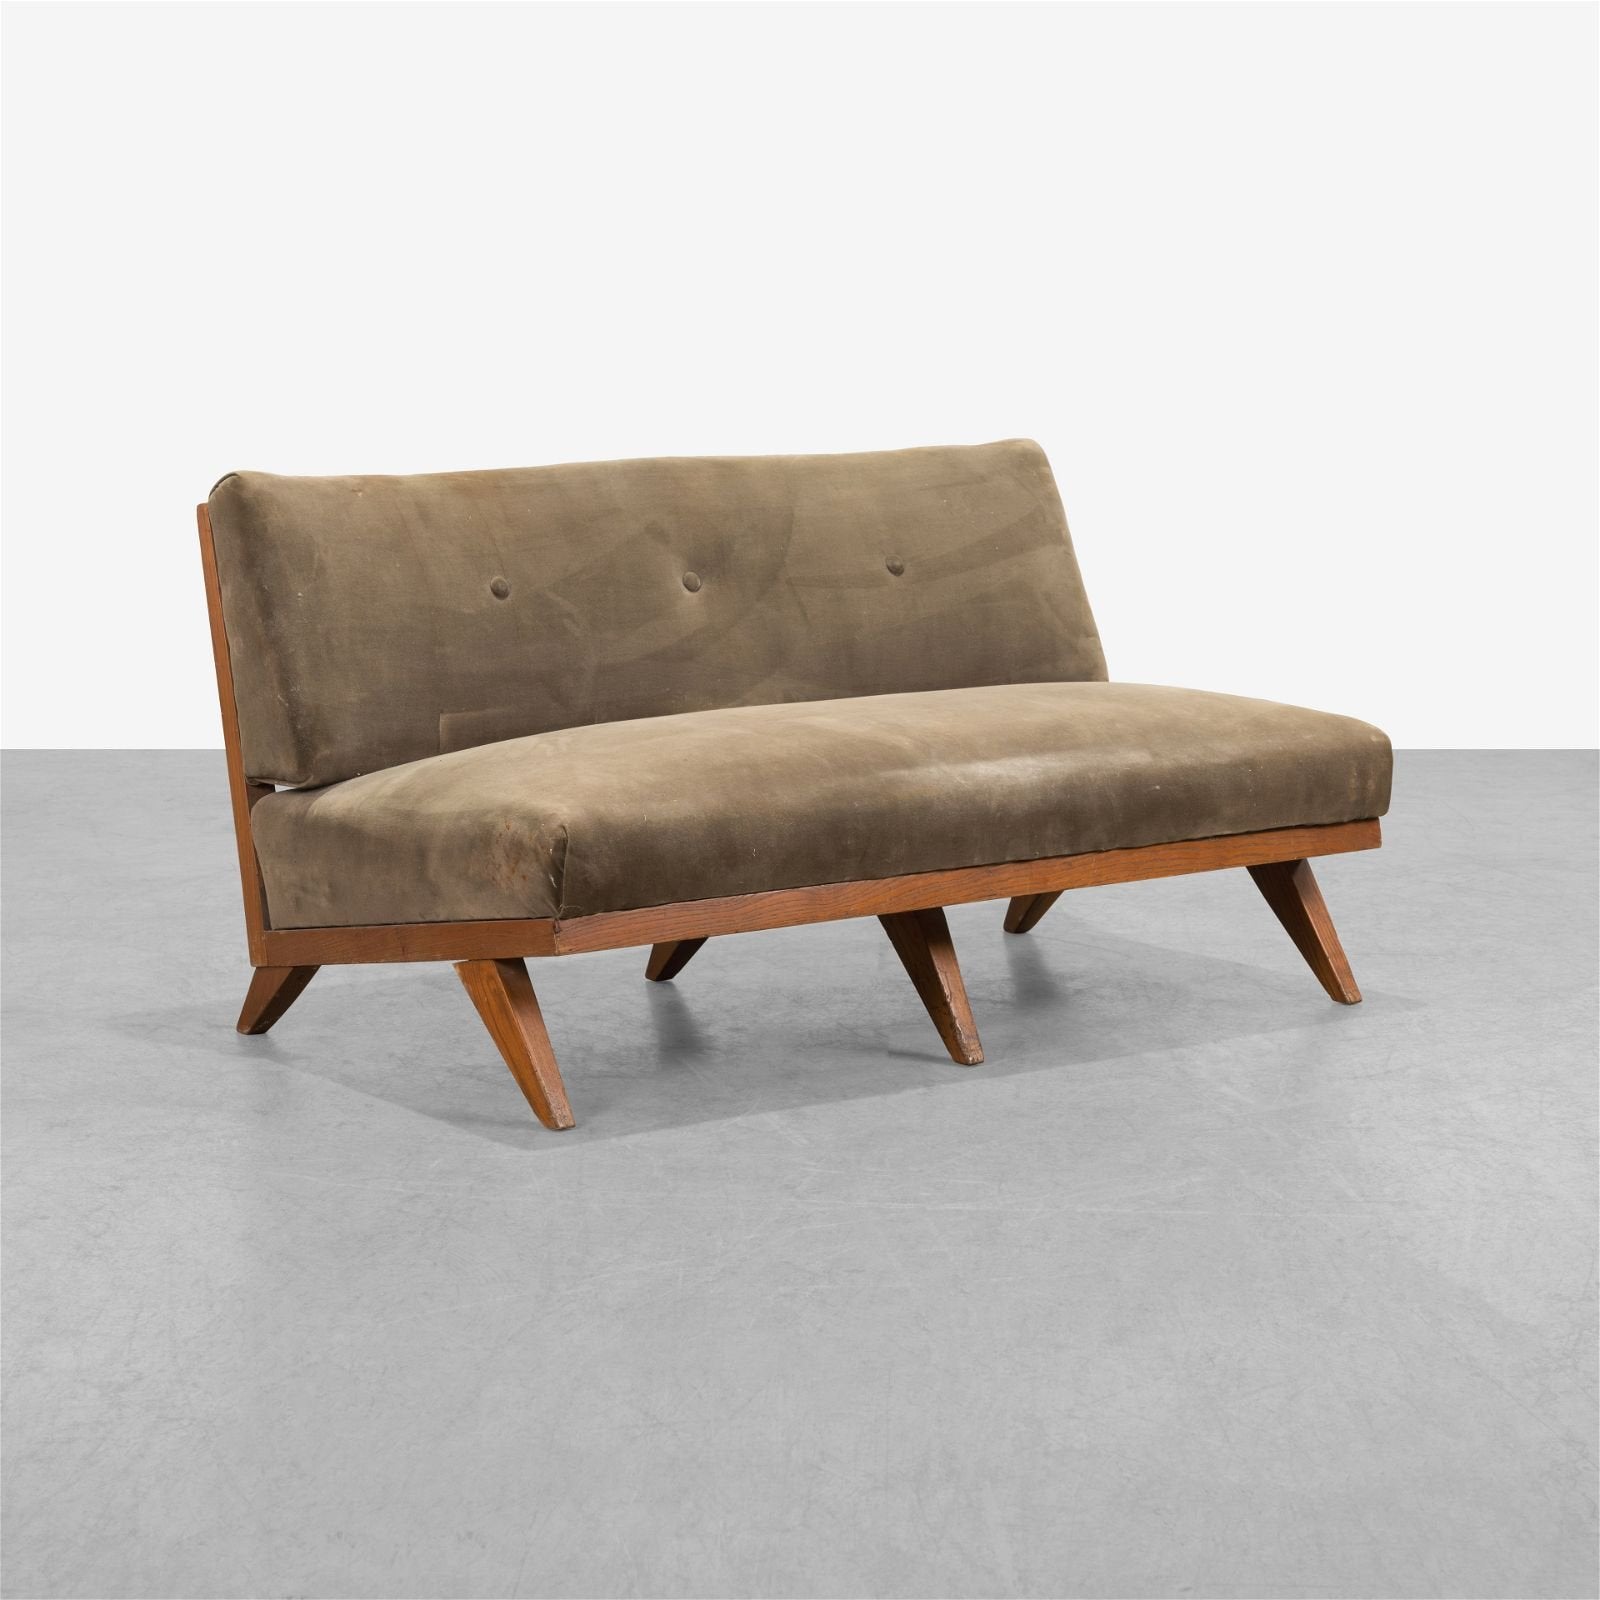 A Midcentury Settee in the Style of Abel Sorenson